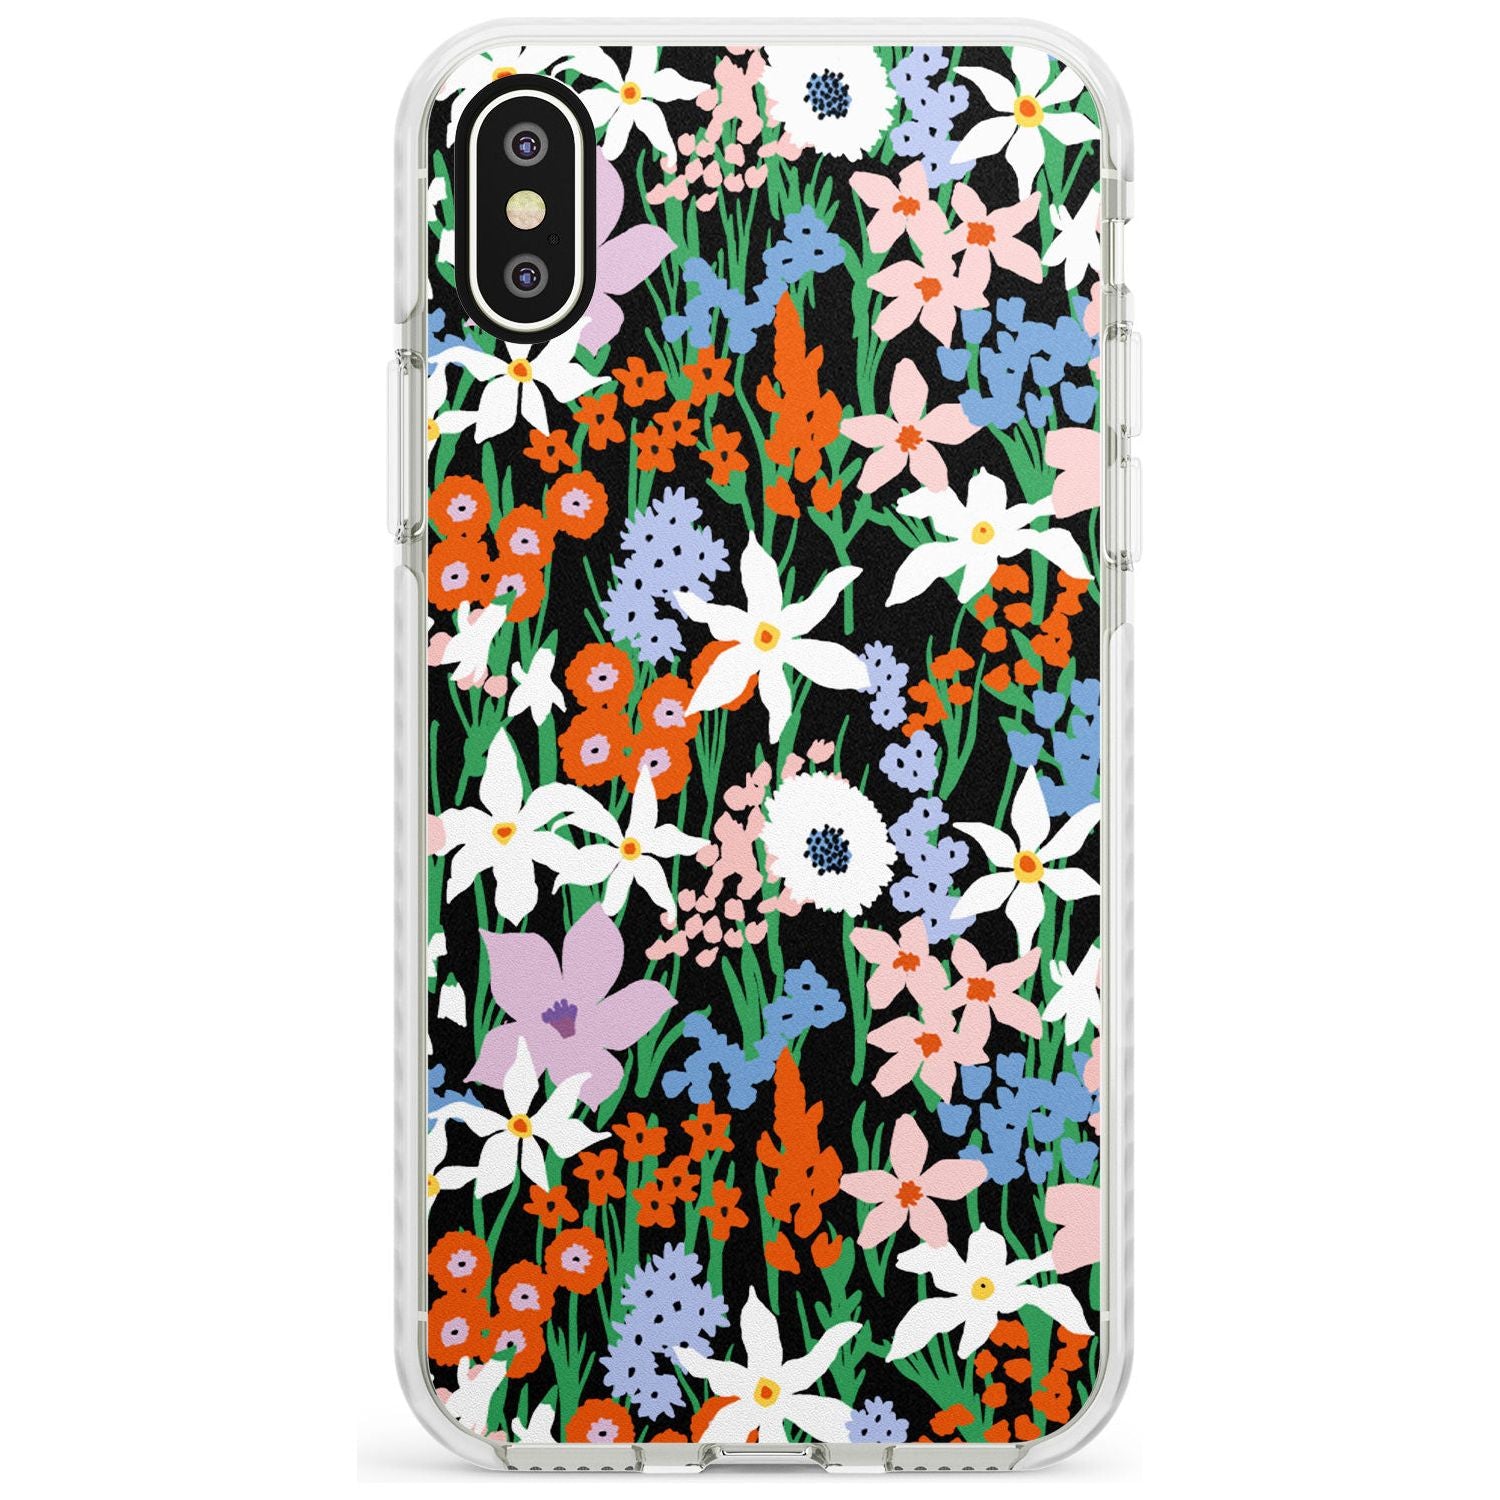 Springtime Meadow: Solid Slim TPU Phone Case Warehouse X XS Max XR